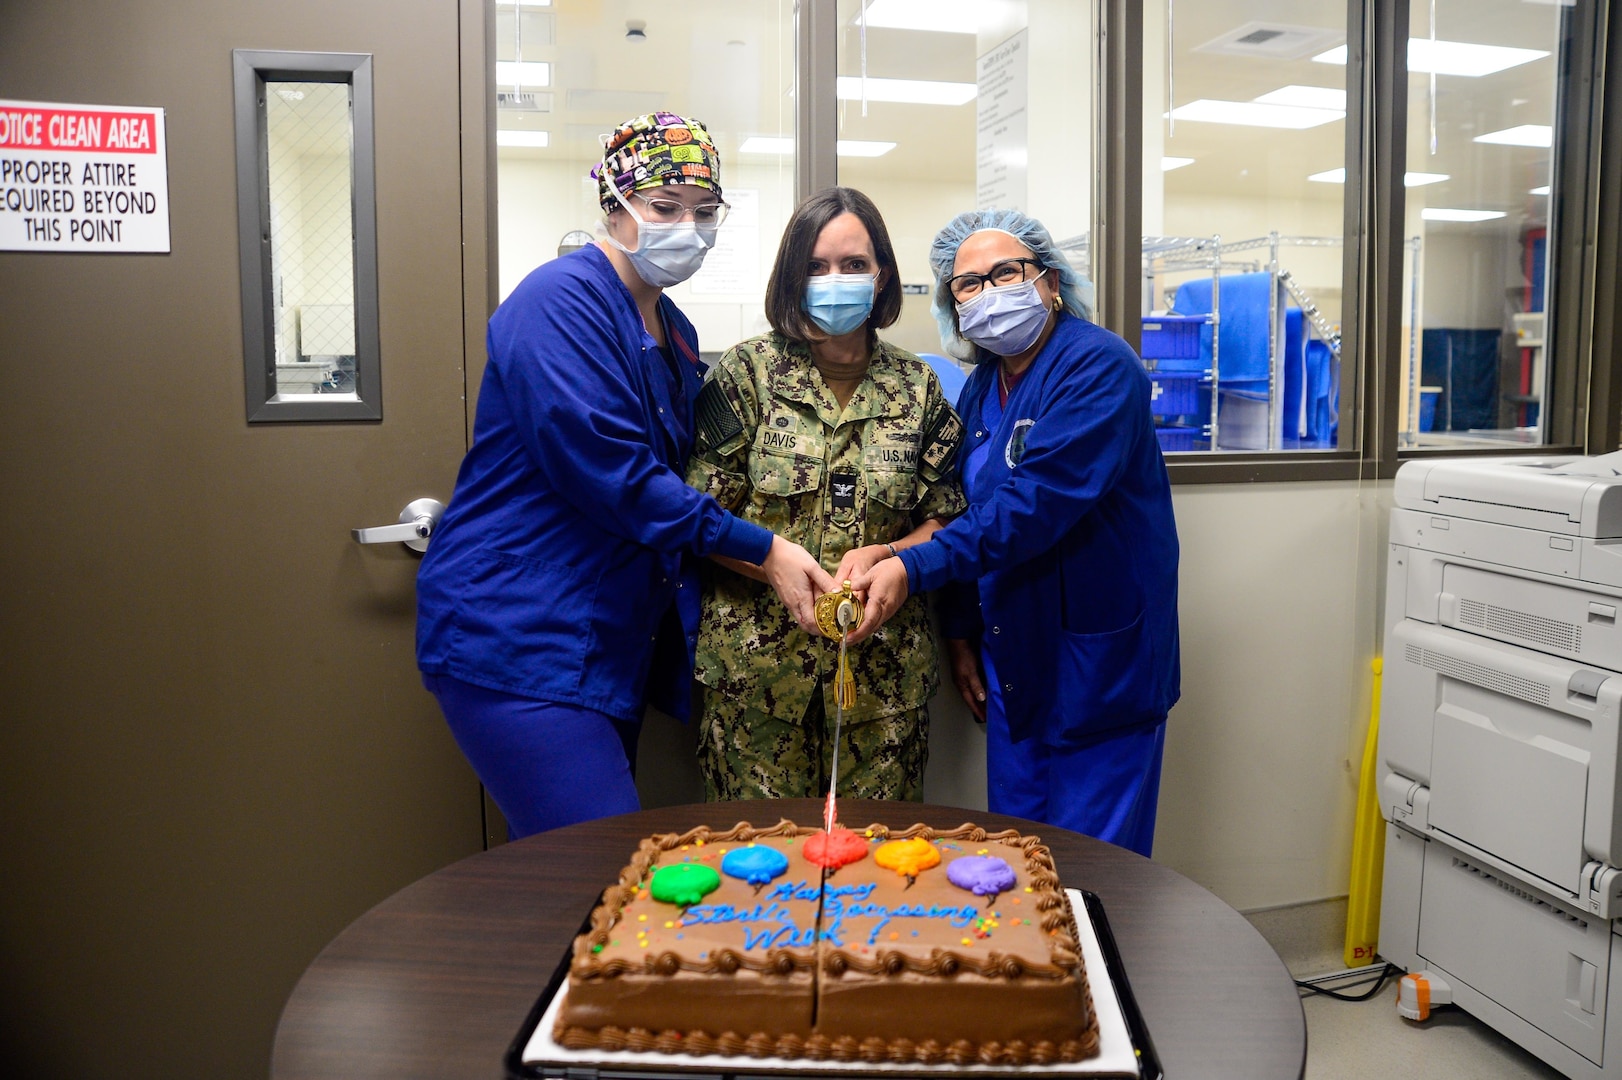 SAN DIEGO (Oct. 12, 2022) Capt. Kim Davis, Navy Medicine Readiness and Training Command San Diego’s commanding officer (center), Hospitalman Falon Olver (left), and Conchita Unger (right), cut a cake during a Sterile Processing Week celebration at the hospital. NMRTC San Diego celebrates Sterile Processing Week to recognize the important role its specialists working in the Sterile Processing Department hold in patient care. NMRTC San Diego's mission is to prepare service members to deploy in support of operational forces, deliver high quality healthcare services and shape the future of military medicine through education, training and research. NMRTC San Diego employs more than 6,000 active duty military personnel, civilians and contractors in Southern California to provide patients with world-class care anytime, anywhere. (U.S. Navy photo by Mass Communication Specialist 3rd Class Raphael McCorey)